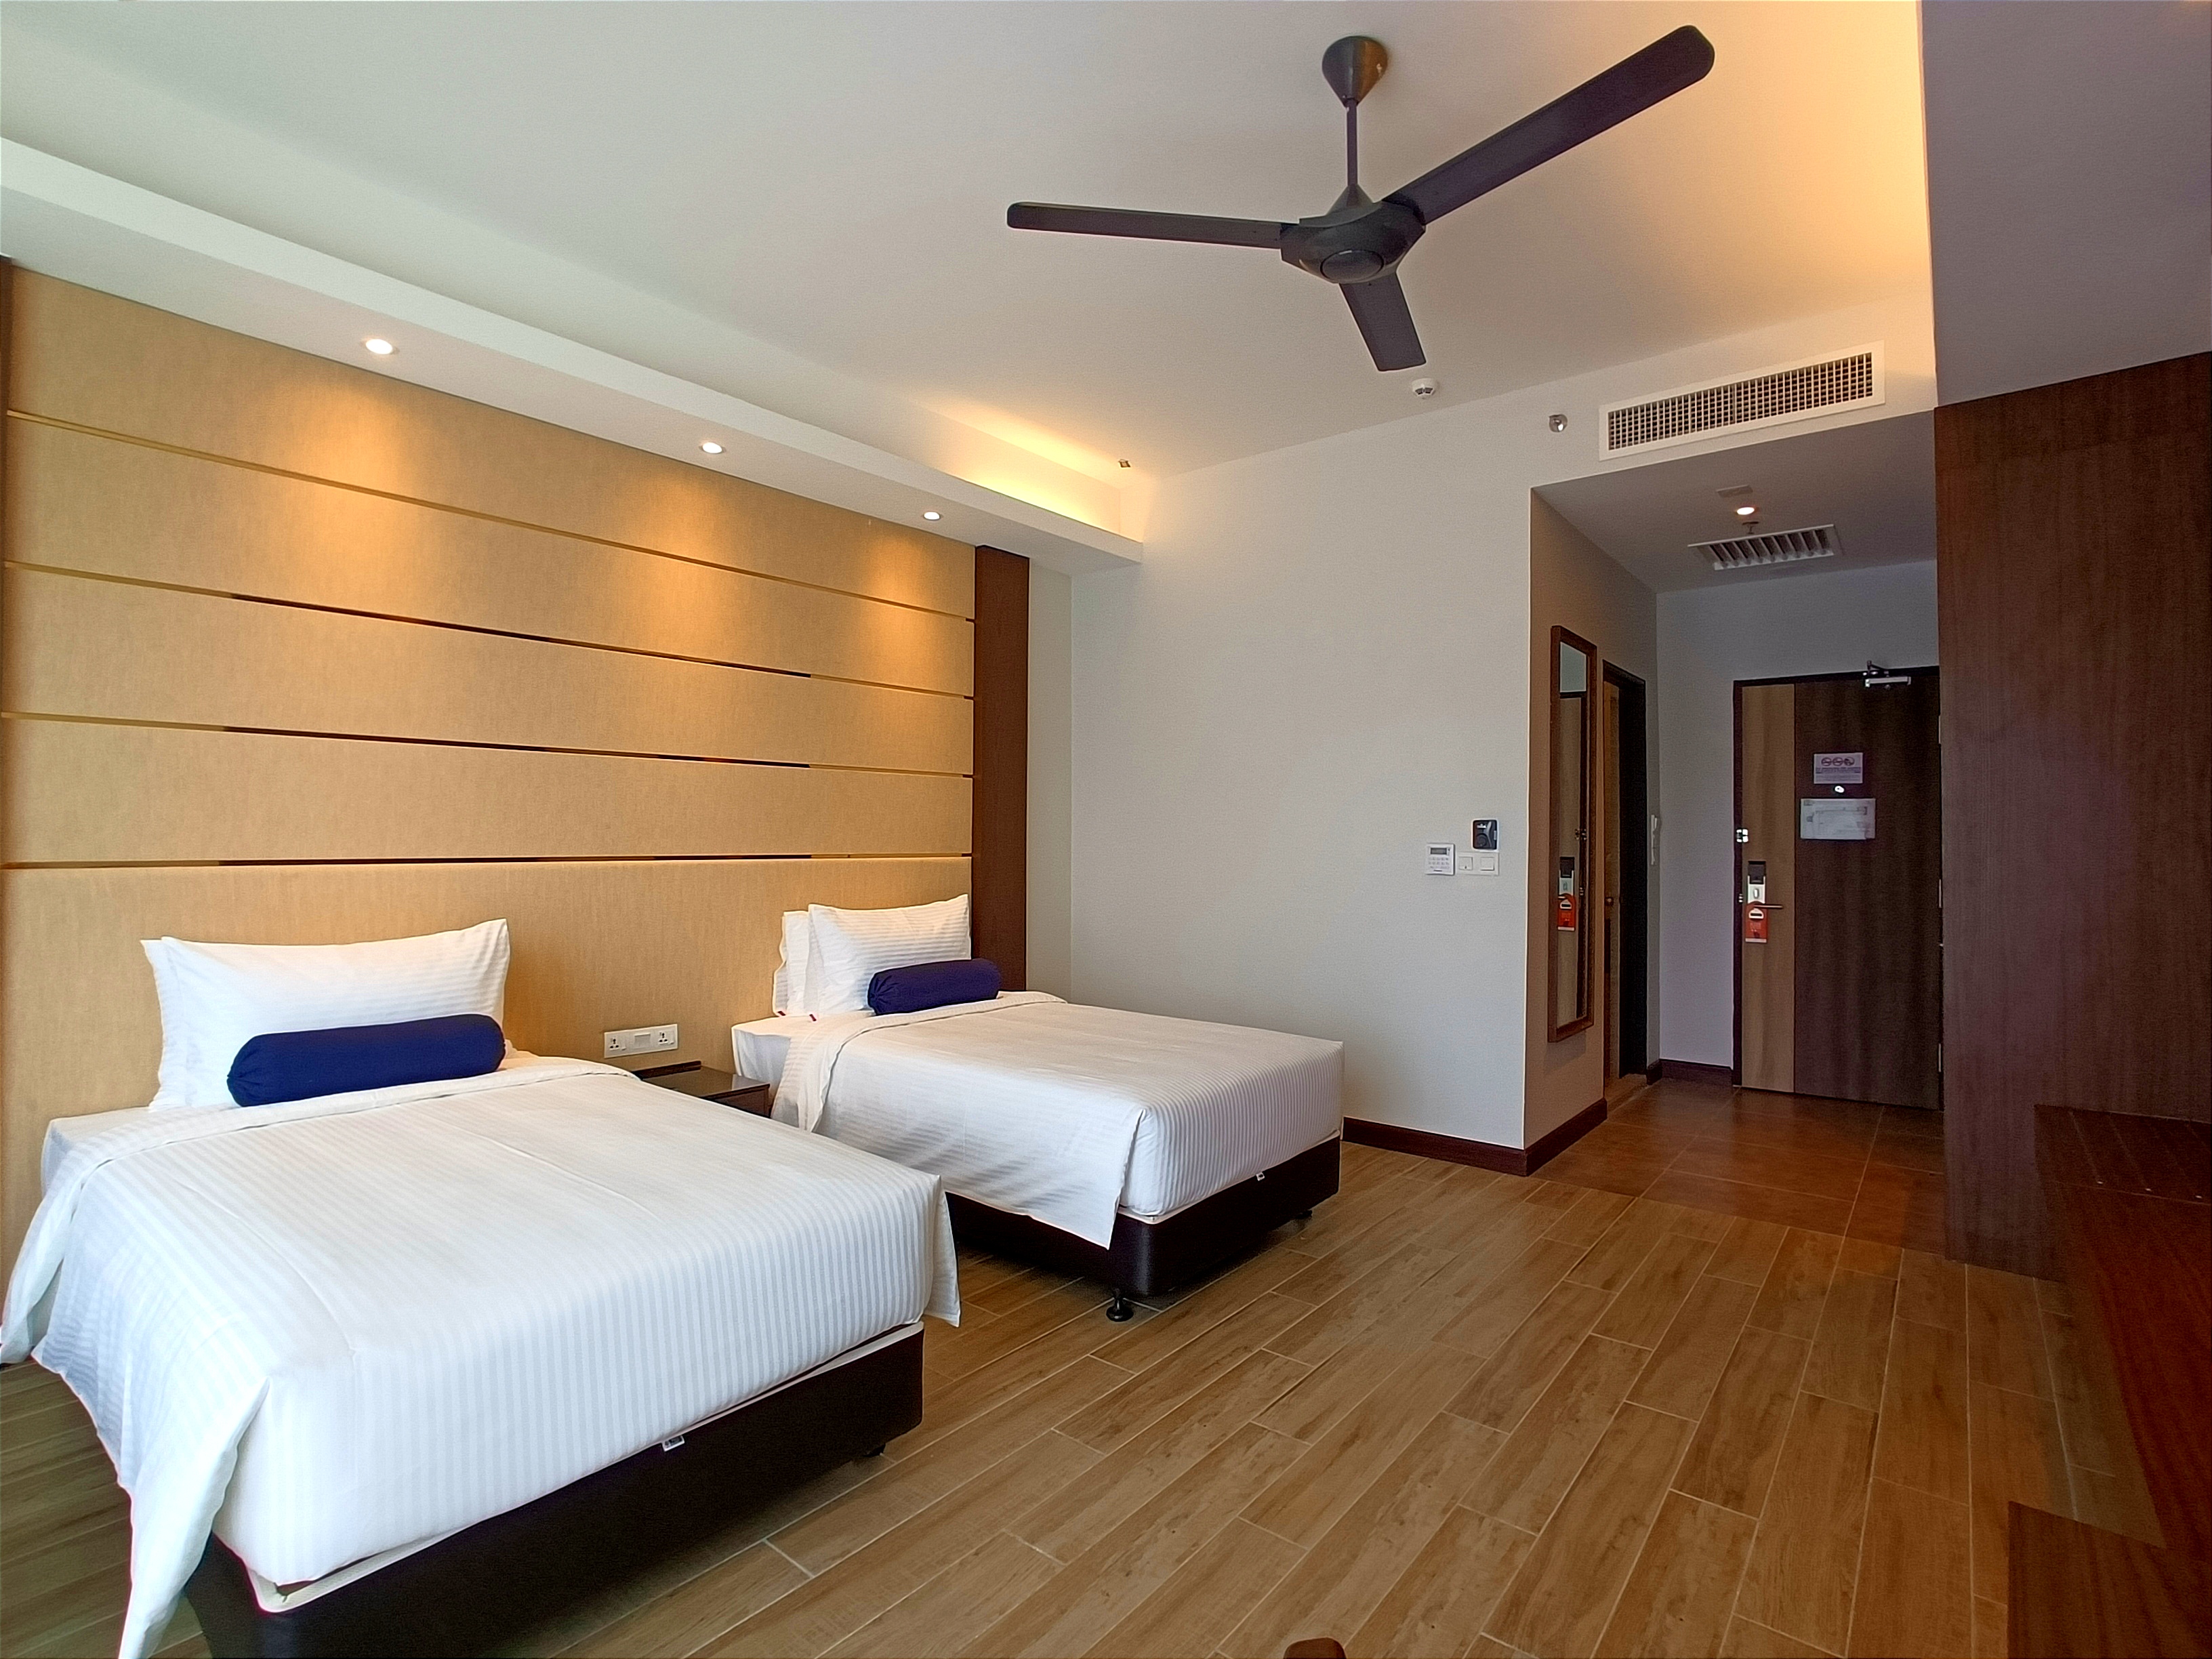 Regency port dickson hotel pacific Relax and